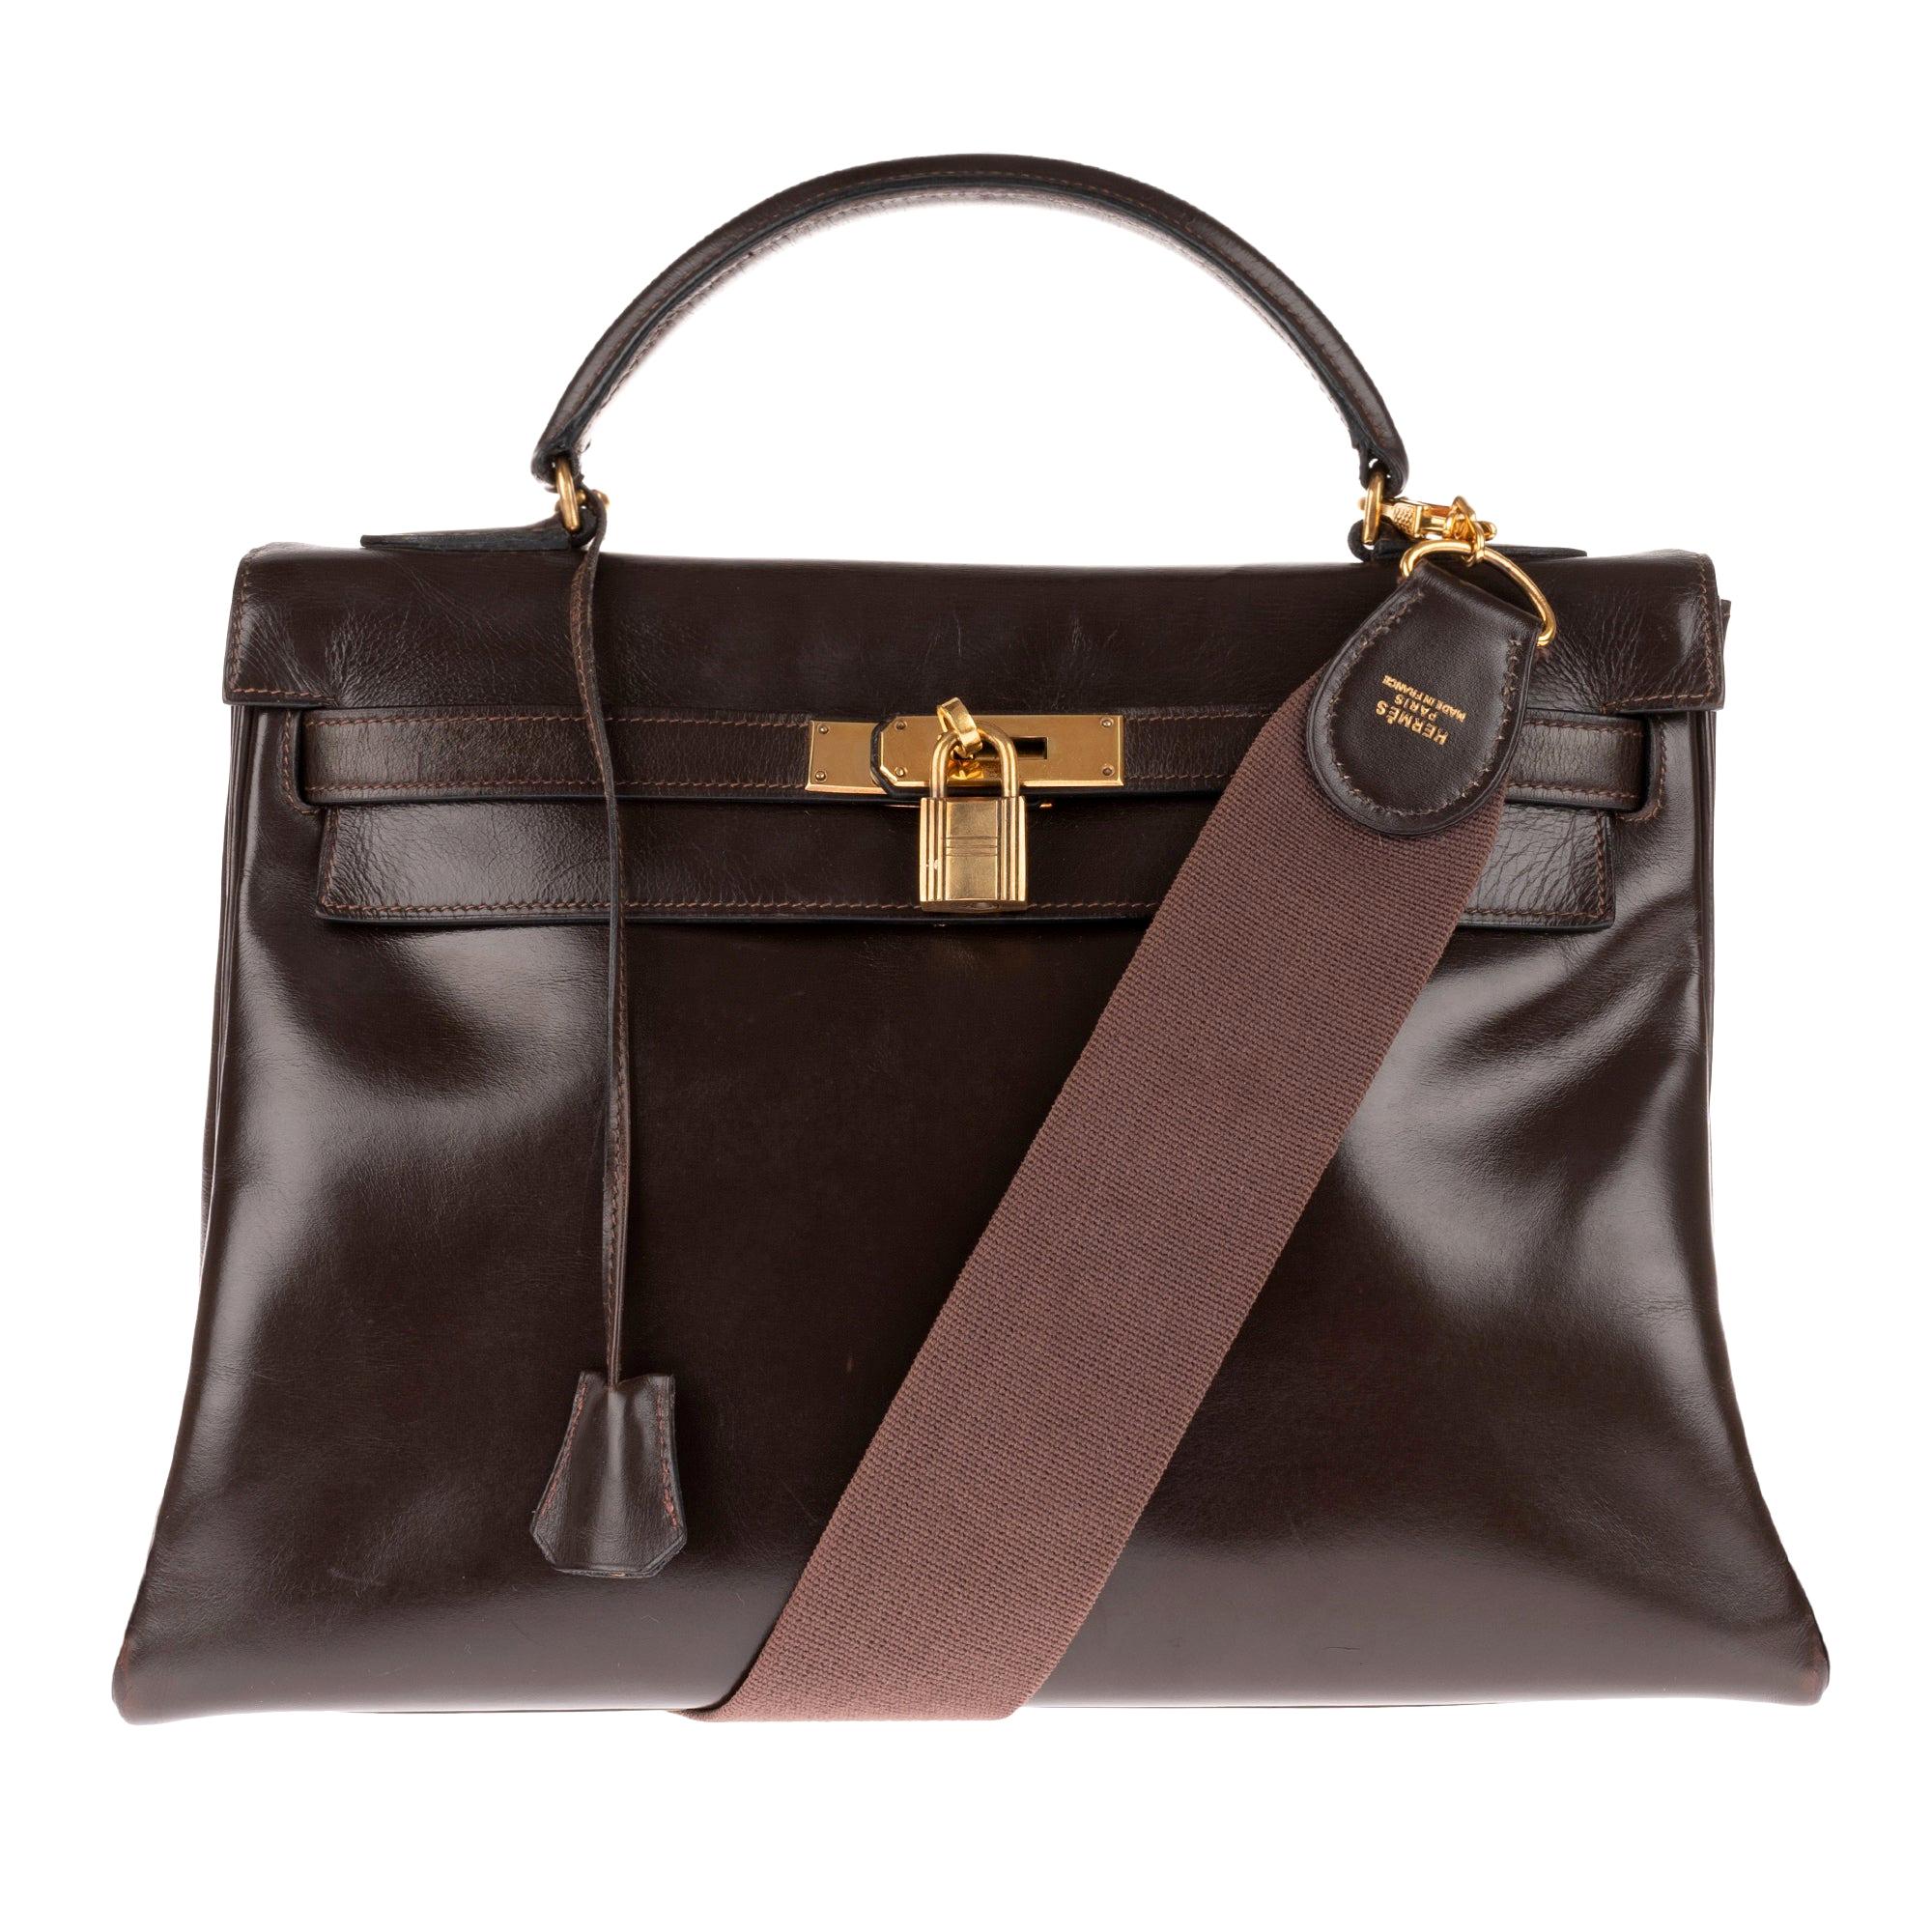 Hermès Kelly 32 handbag in brown calfskin leather with strap and golden hardware